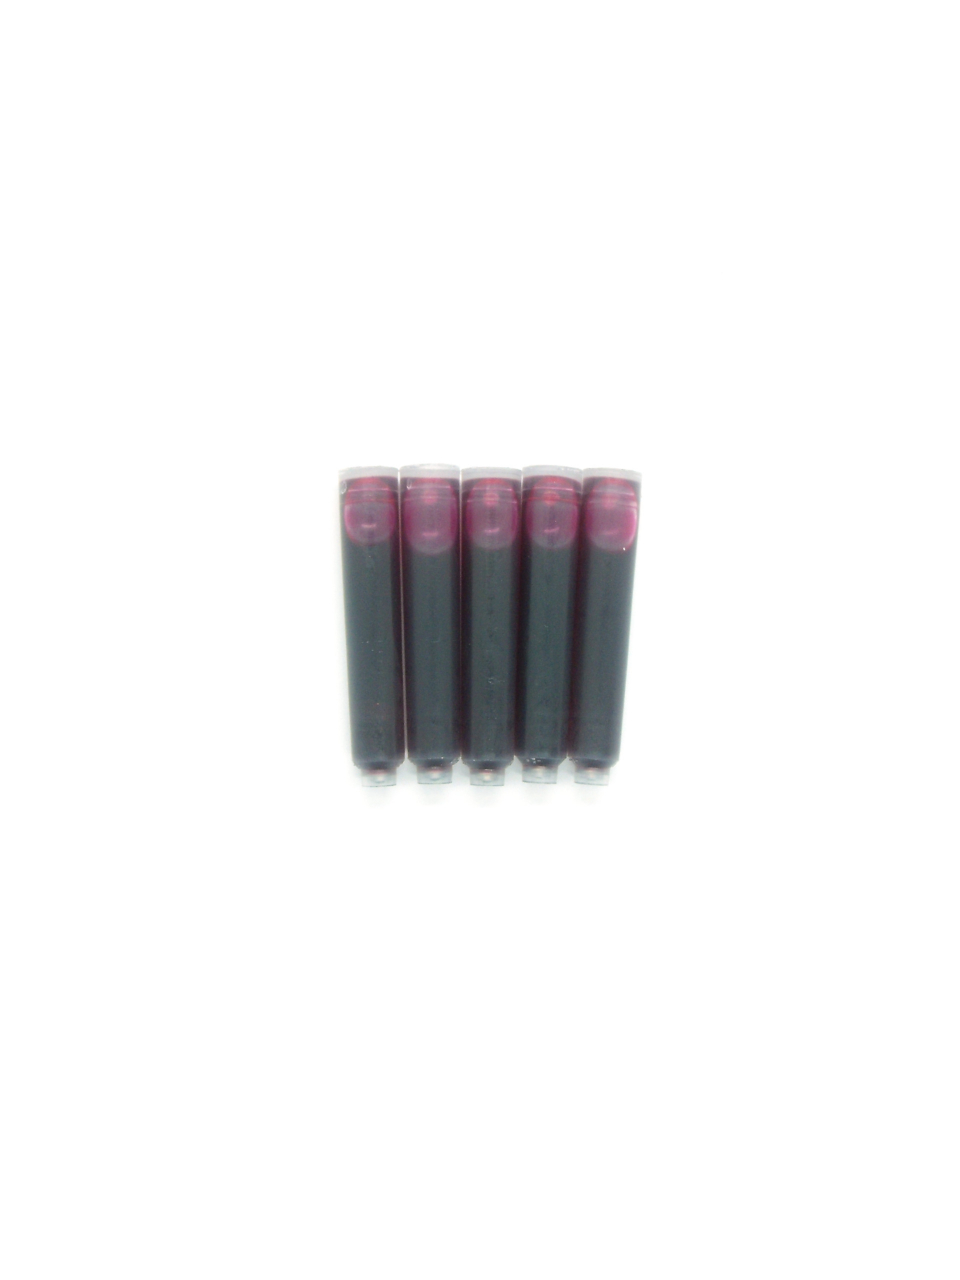 PenConverter Ink Cartridges For Xezo Fountain Pens (Pink)